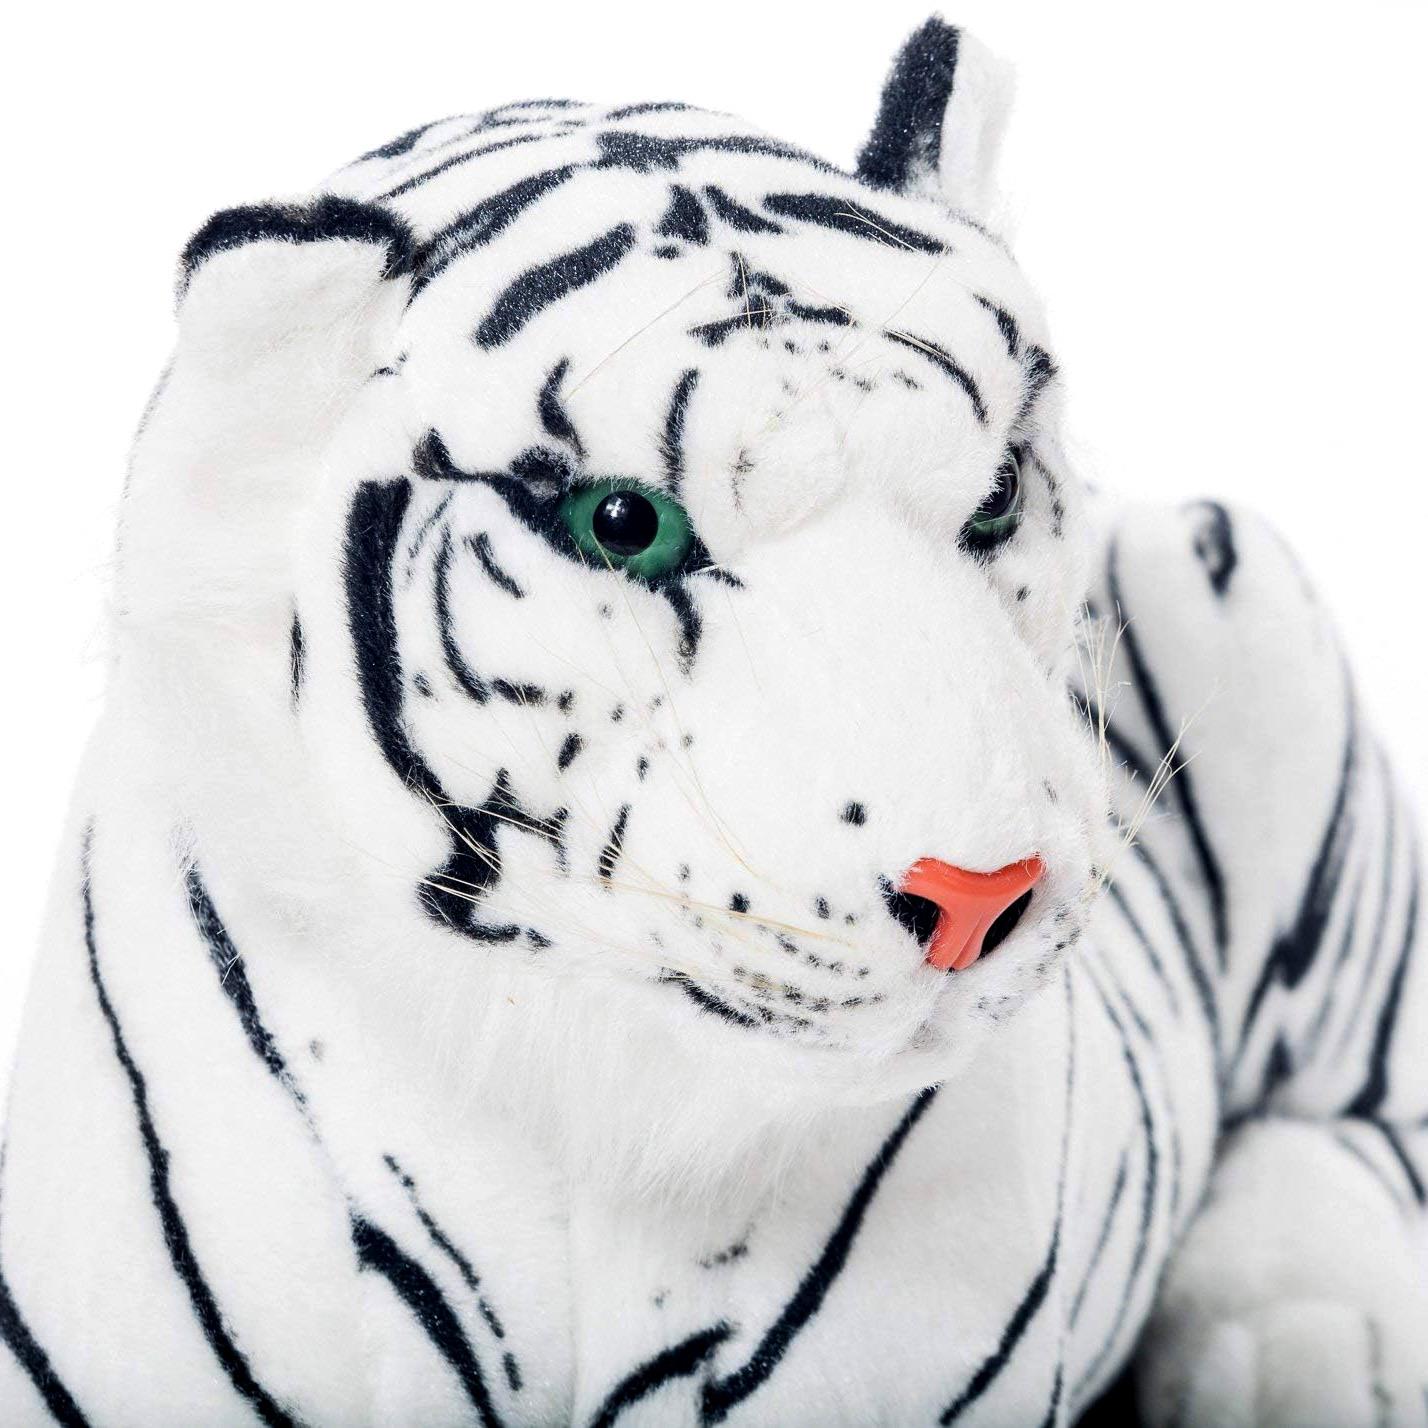 The Magic Toy Shop toyfigure Small White Tiger Soft Plush Toy